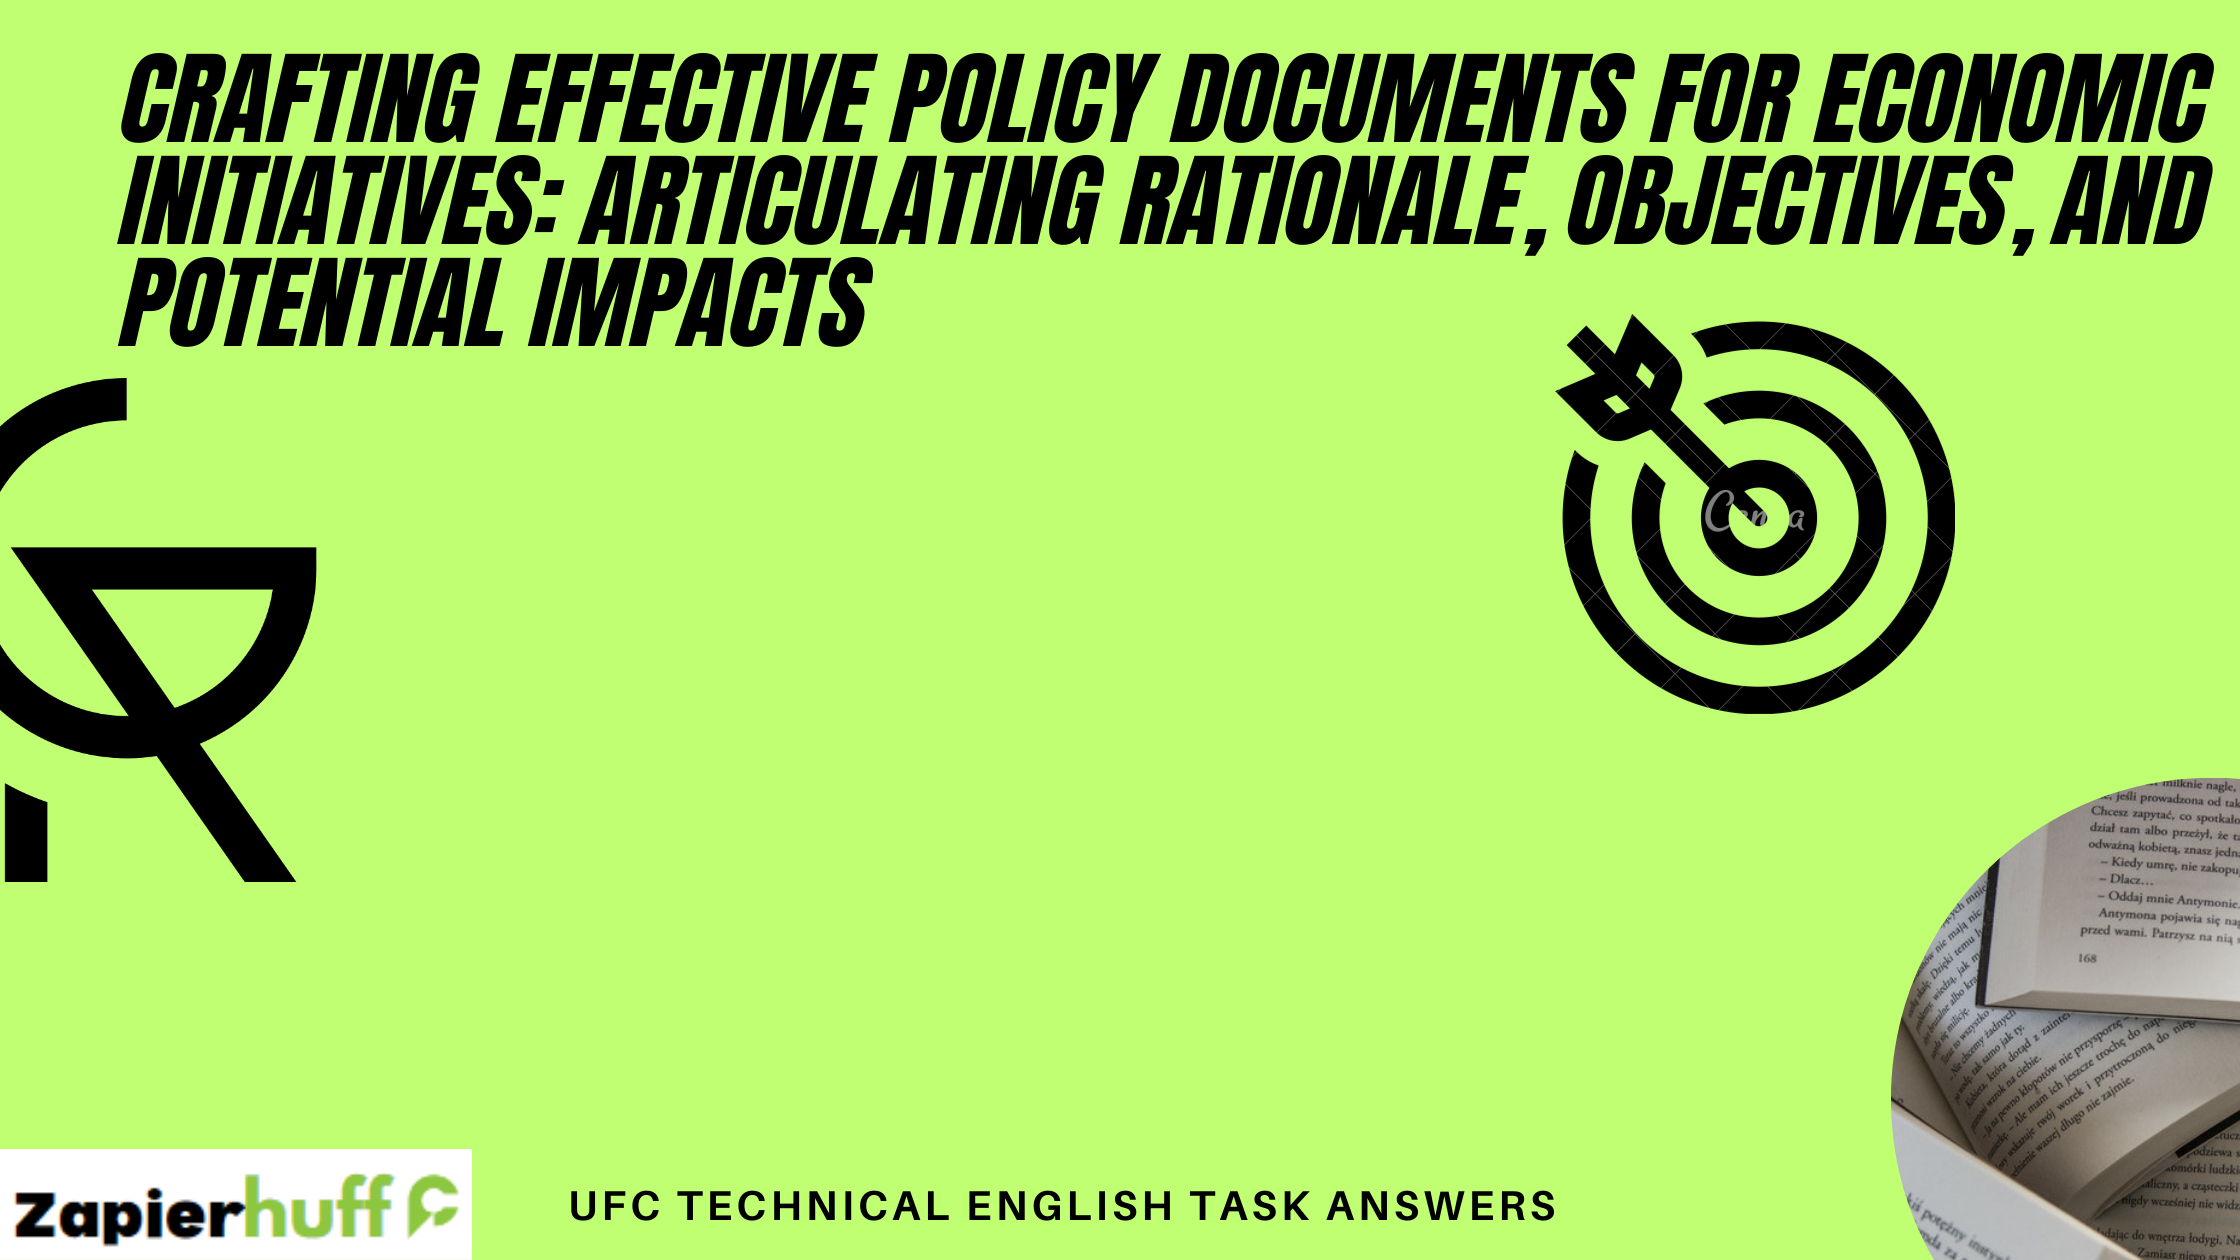 Crafting Effective Policy Documents for Economic Initiatives: Articulating Rationale, Objectives, and Potential Impacts